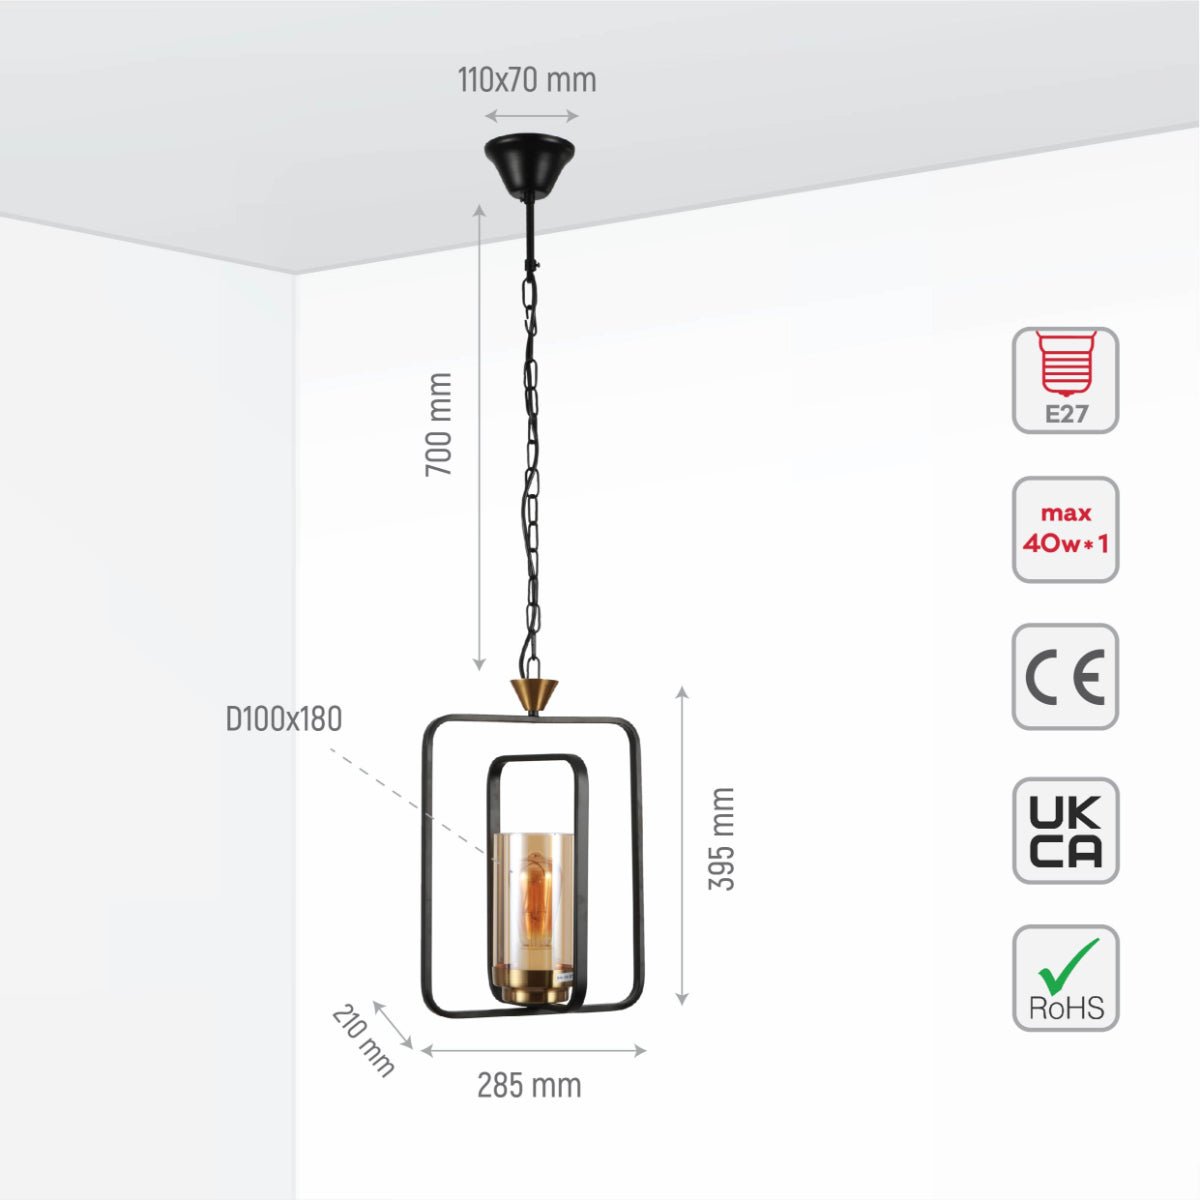 Size and specs of Black Metal Cage Body Amber Cylinder Glass Pendant Ceiling Light with E27 Fitting | TEKLED 159-17440